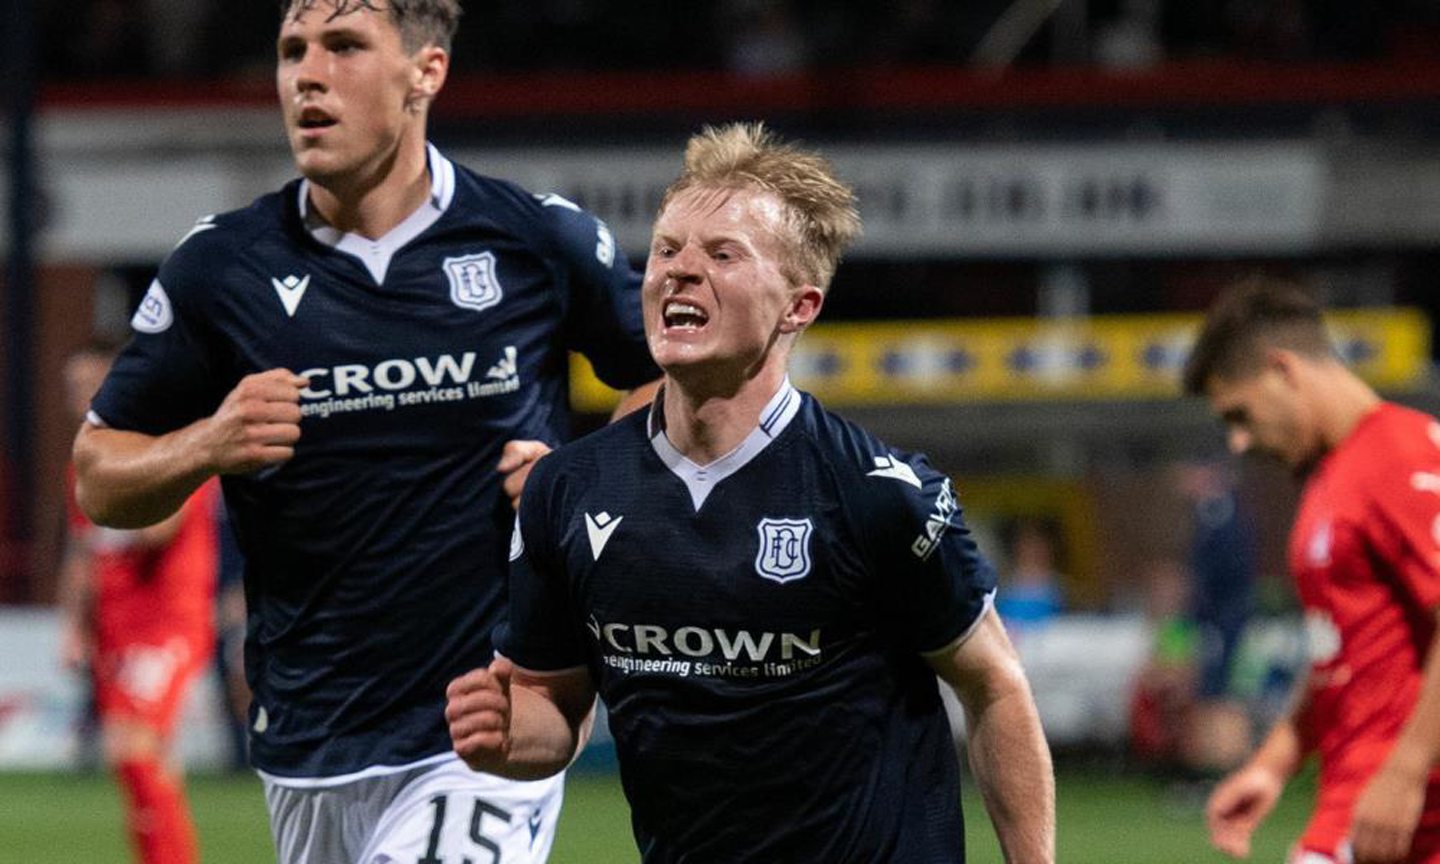 Dundee's Lyall Cameron celebrates the opening goal against Falkirk.